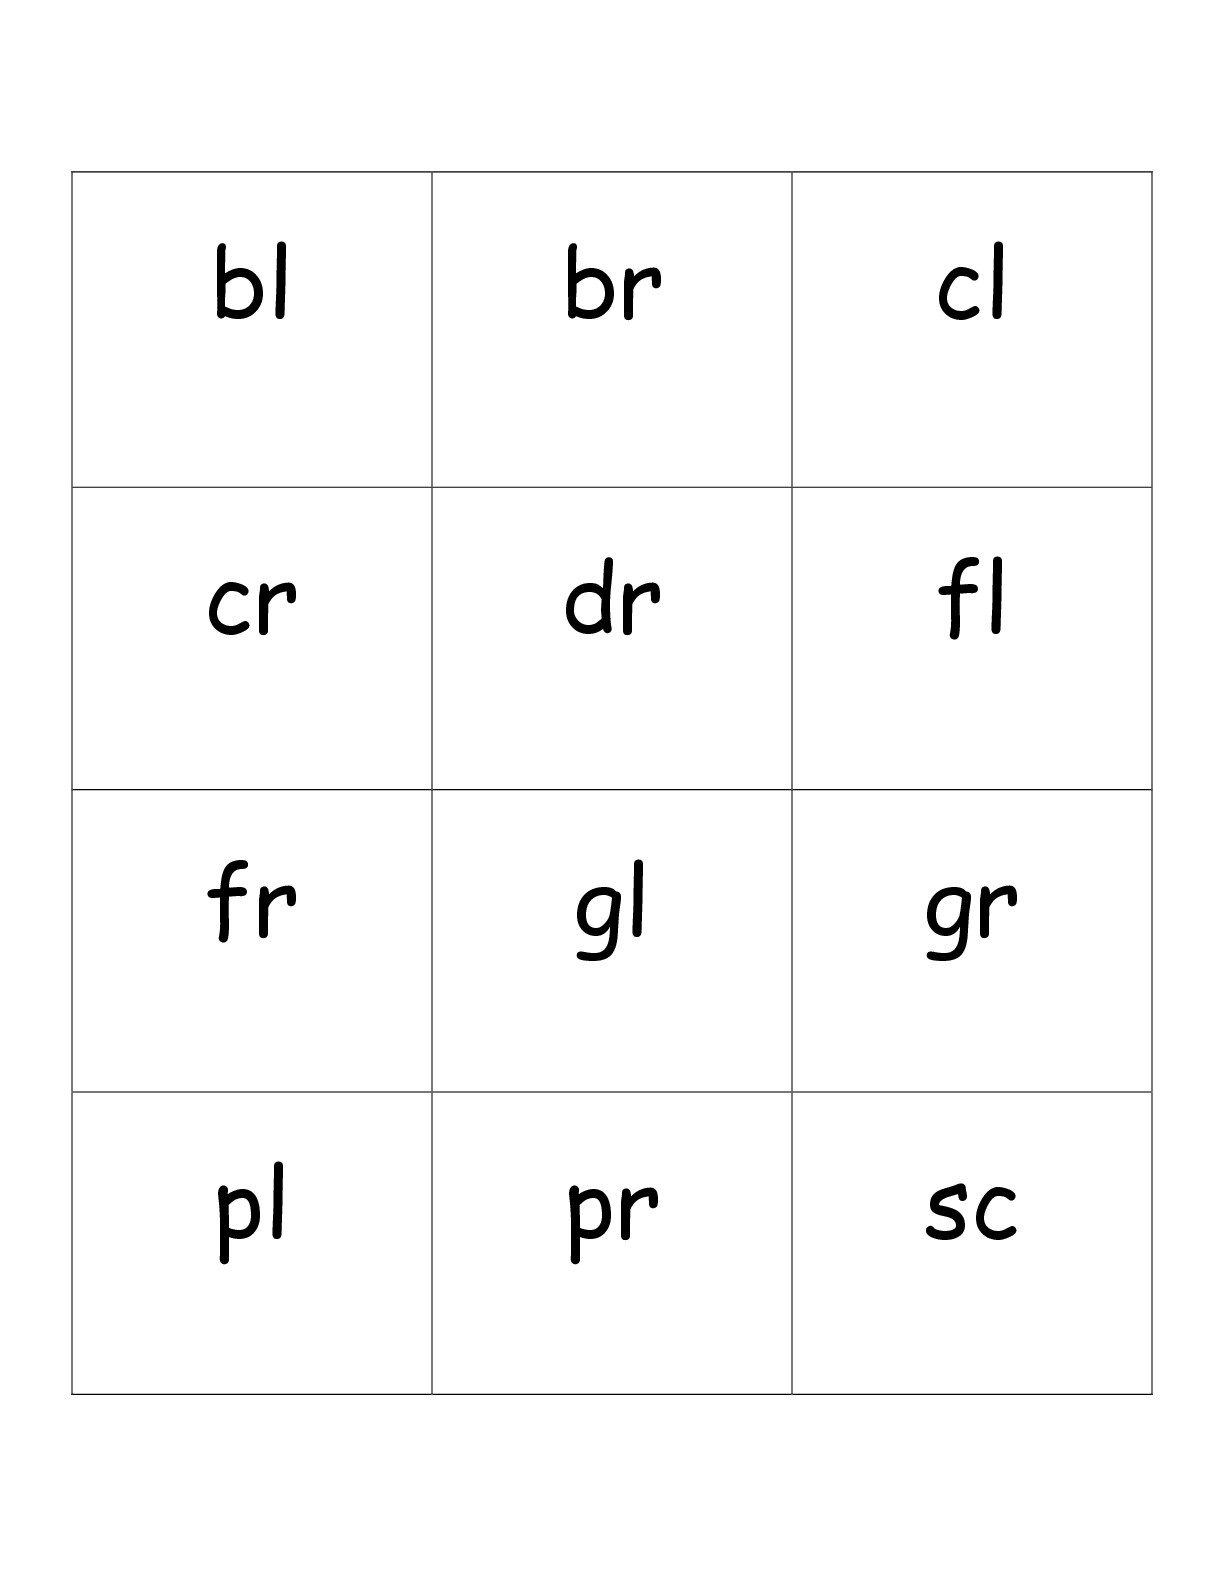 Free Phonics Printouts From The Teacher&amp;#039;s Guide - Free Printable Phonics Flashcards With Pictures